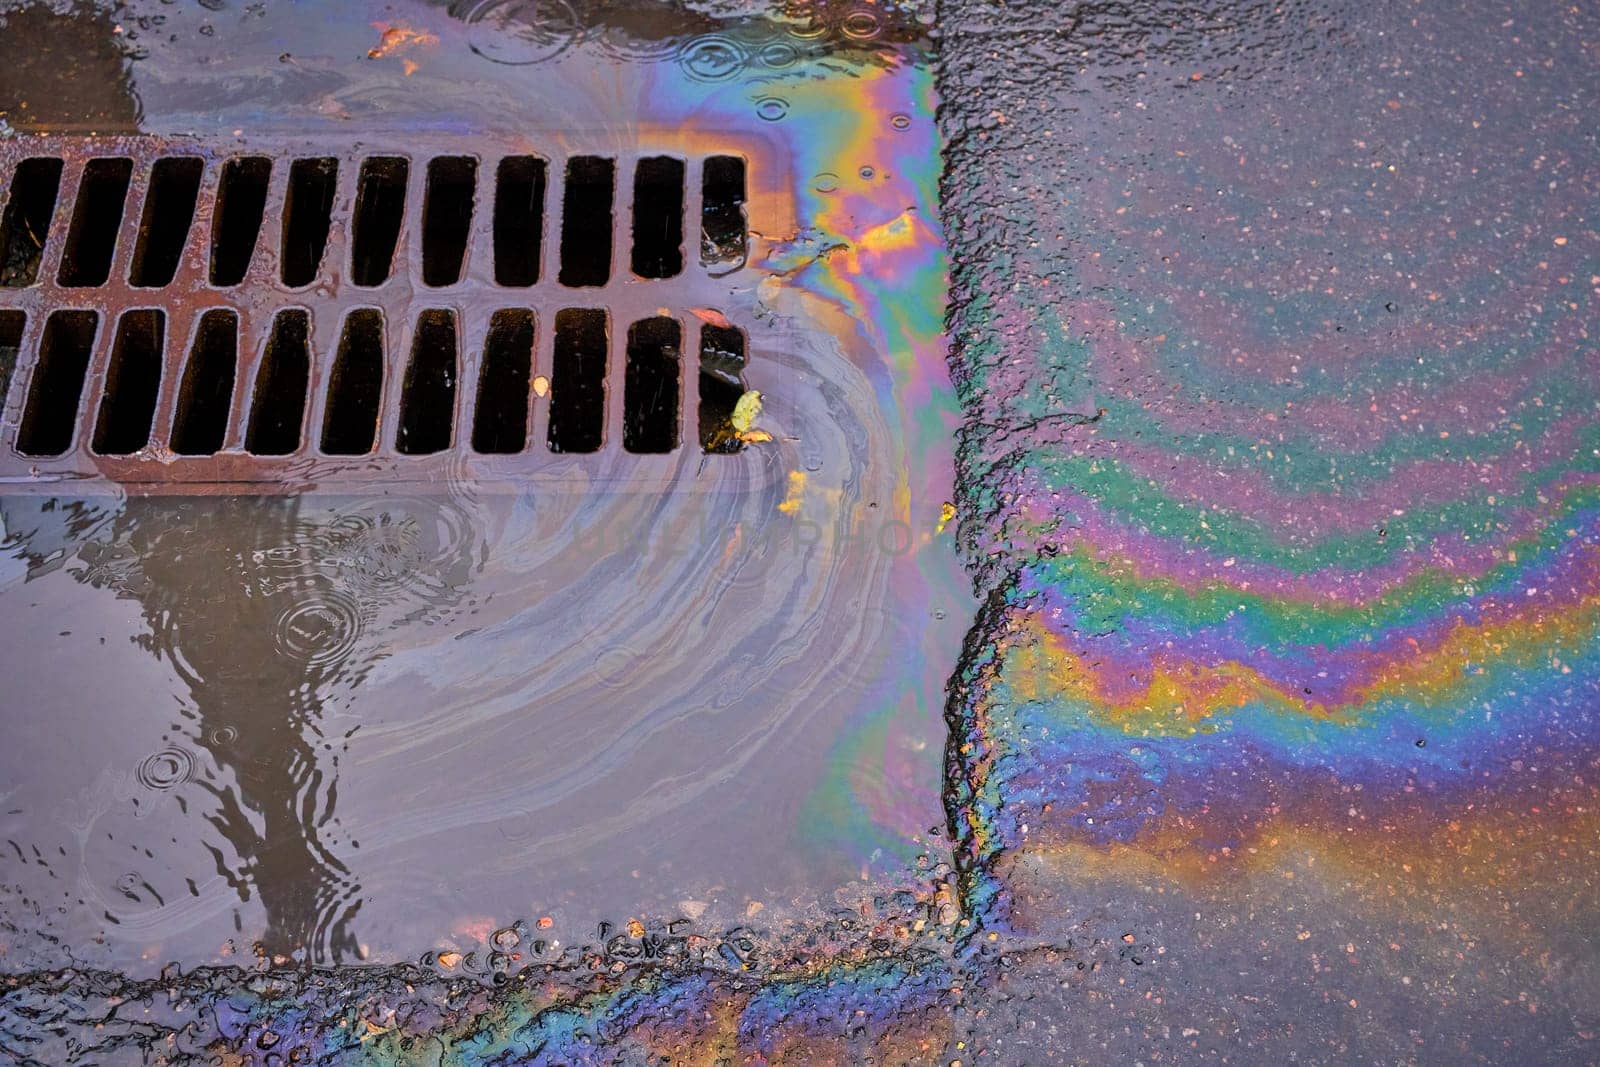 An oil slick against the backdrop of an asphalt road flows into a storm drain through a grate. Environmental problems of water pollution.